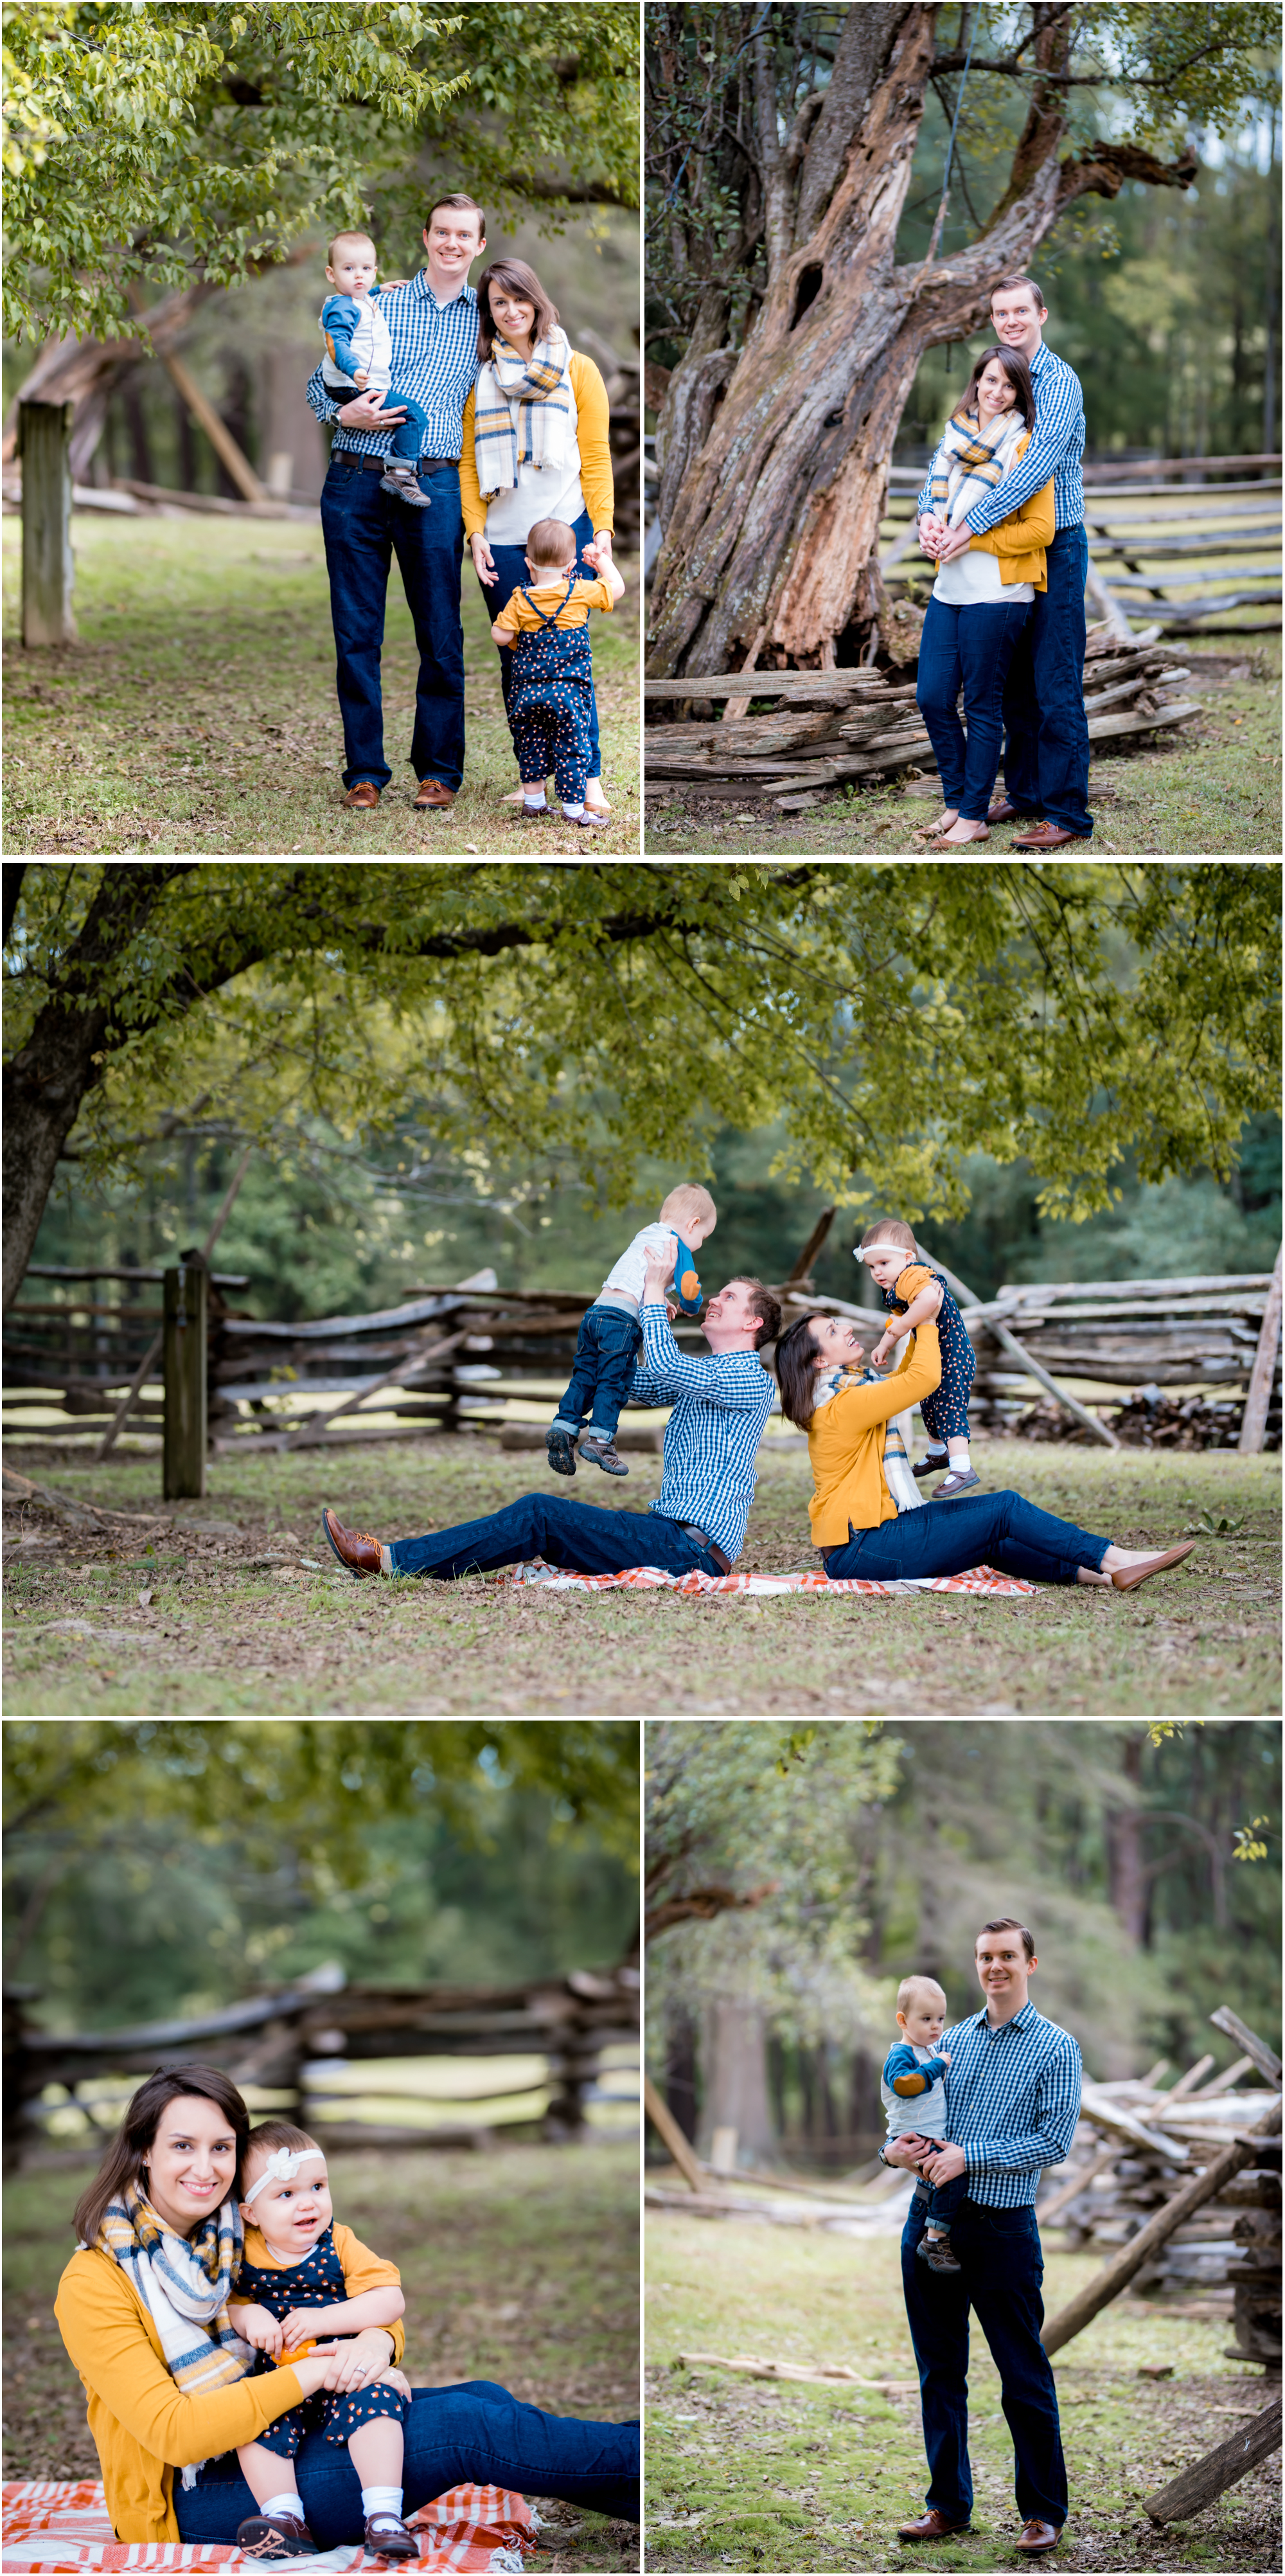 Family pictures at Meadow Farm Park